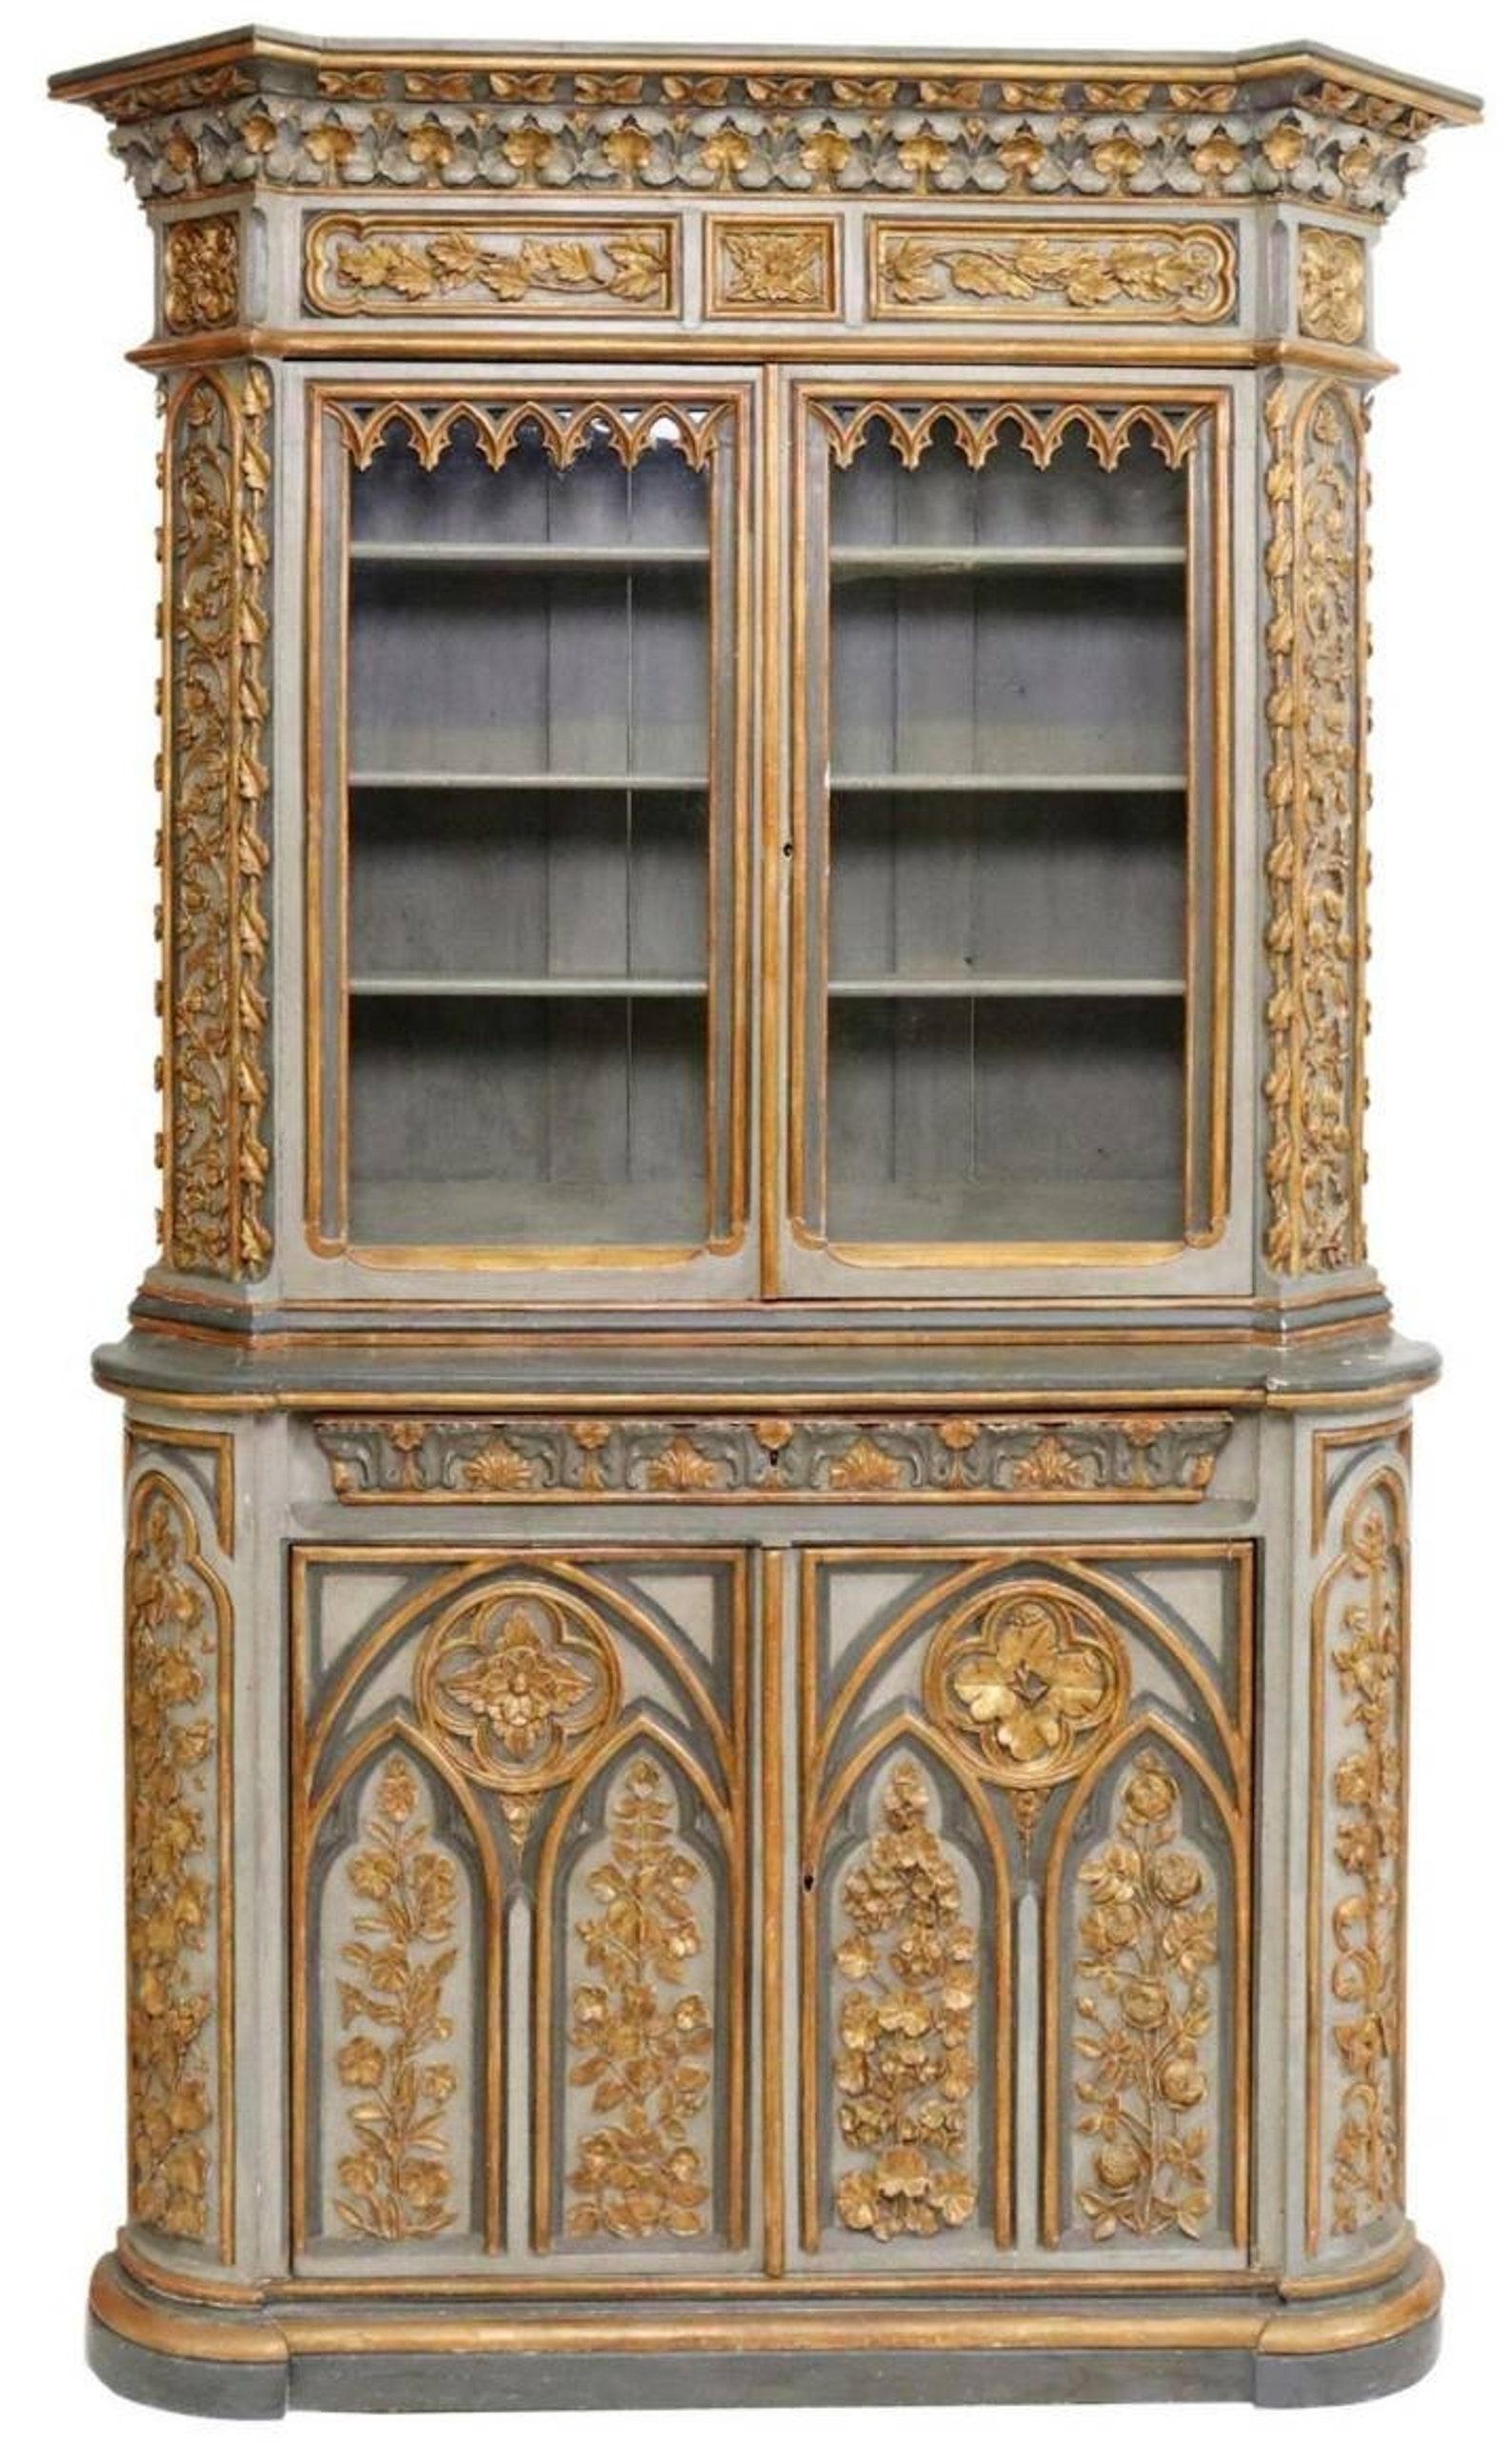 Hand-Carved 19th Century French Gothic Revival Carved Bibliothèque Bookcase For Sale